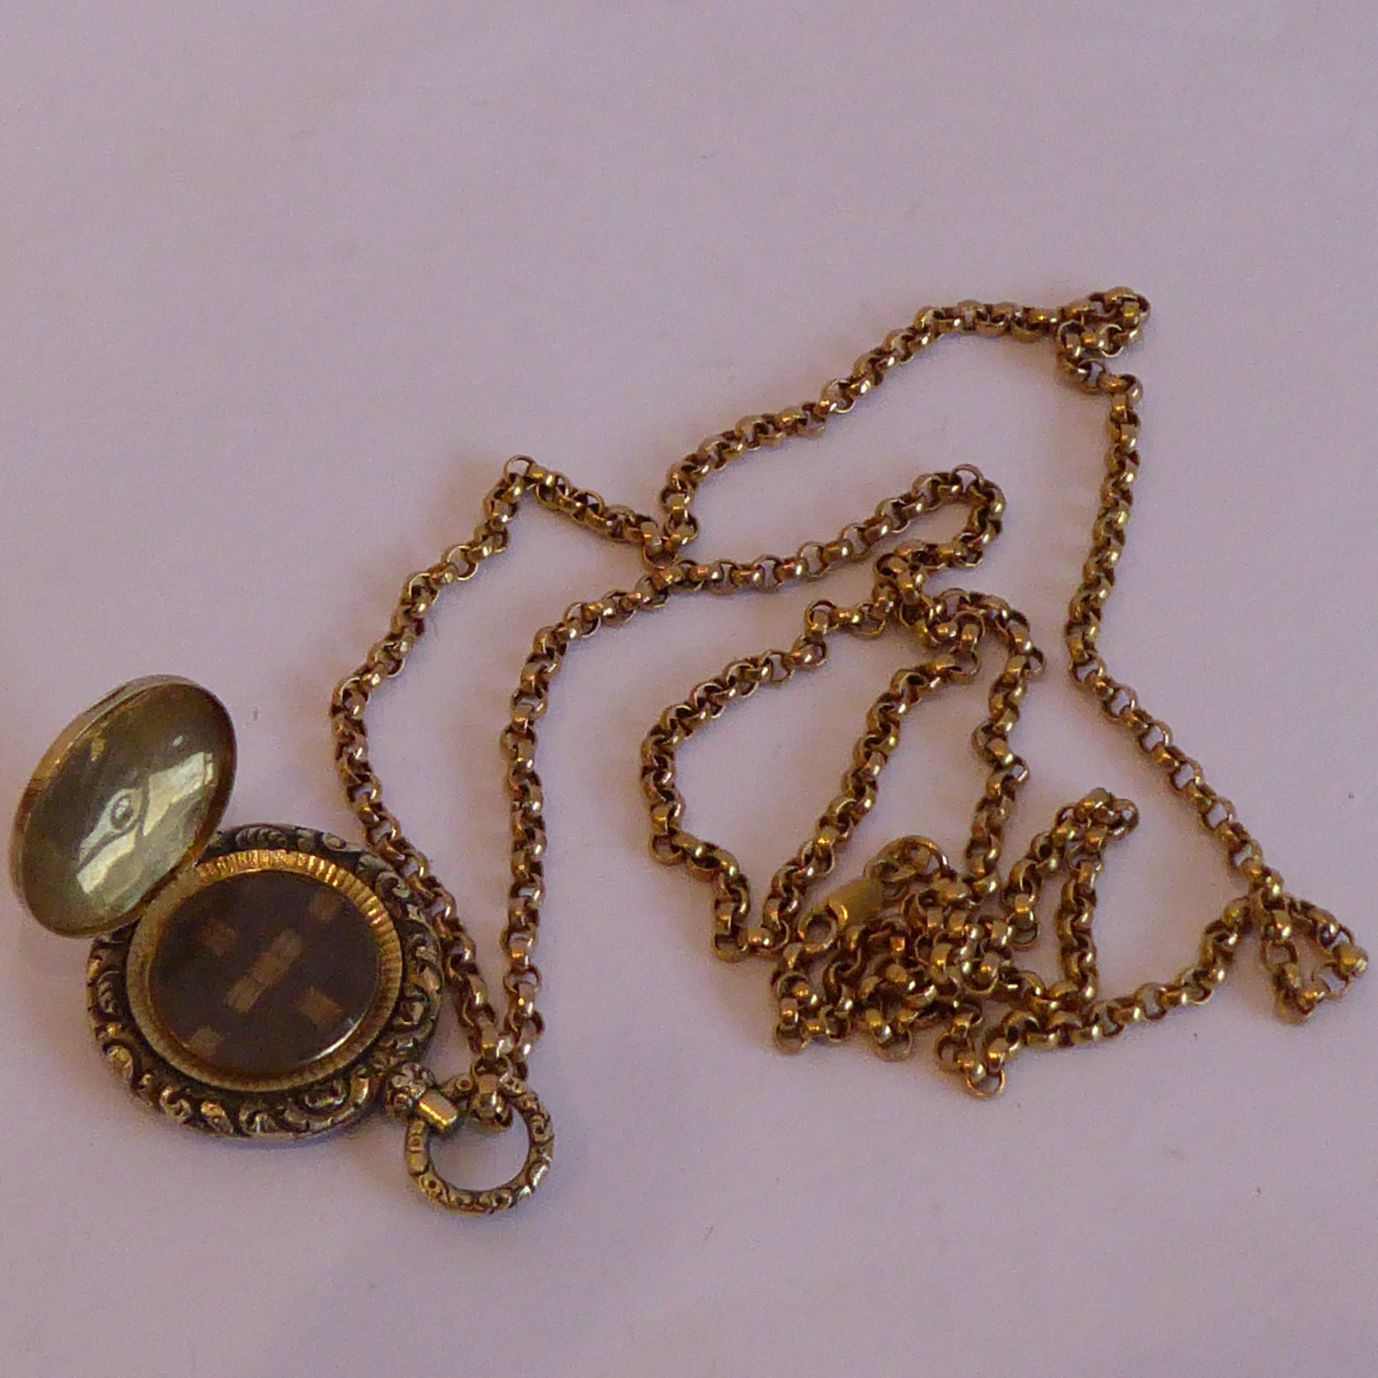 A 19th century yellow-metal circular mourning pendant containing a section of plaited dark and blond